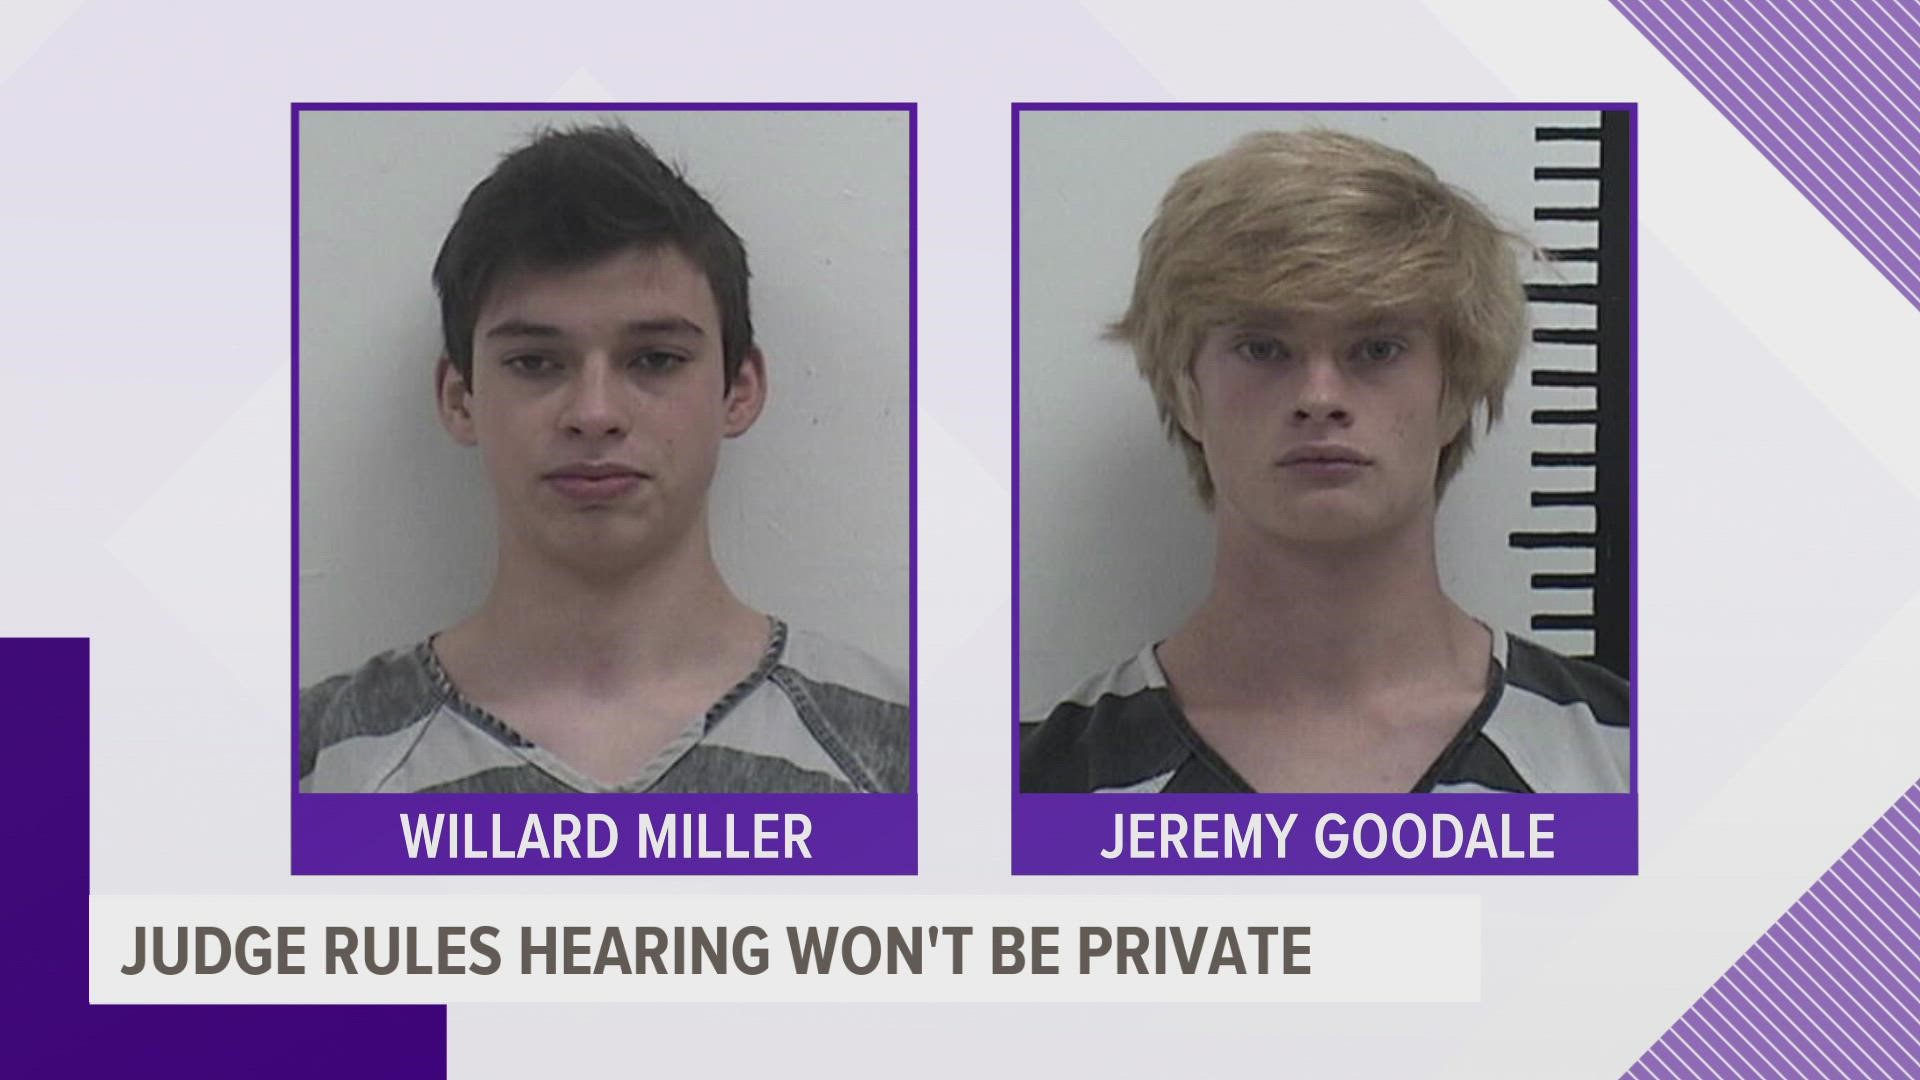 Jeremy Goodale and Willard Miller, both 16 years old, are charged with the murder of their former Spanish teacher, and are to appear in a public hearing on Thursday.